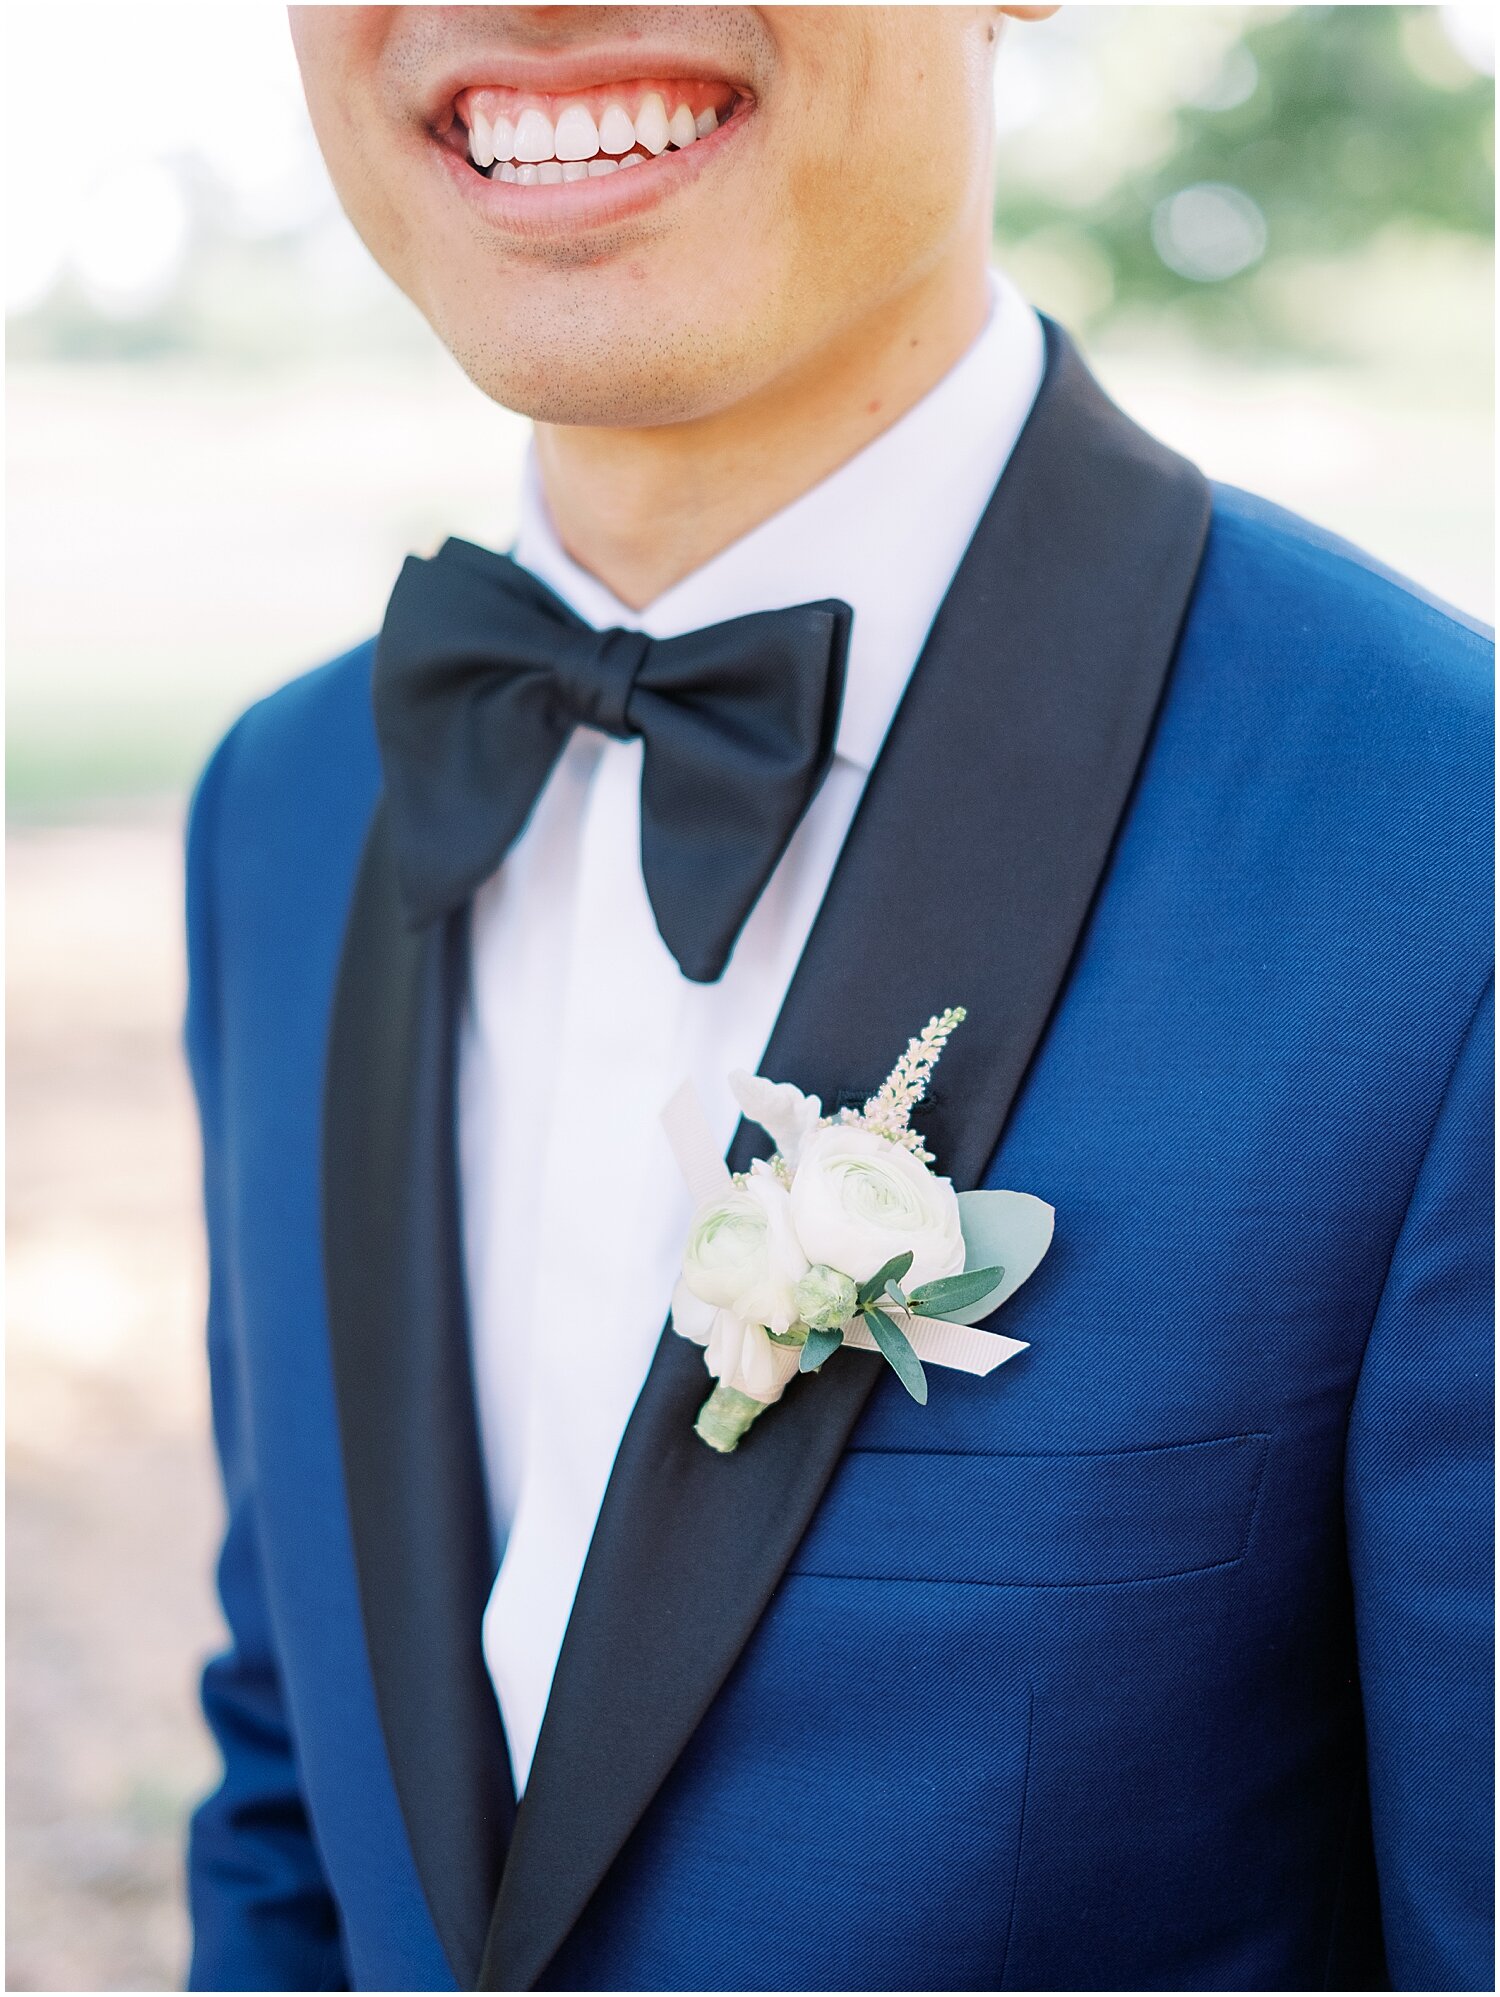  groom’s boutonniere  